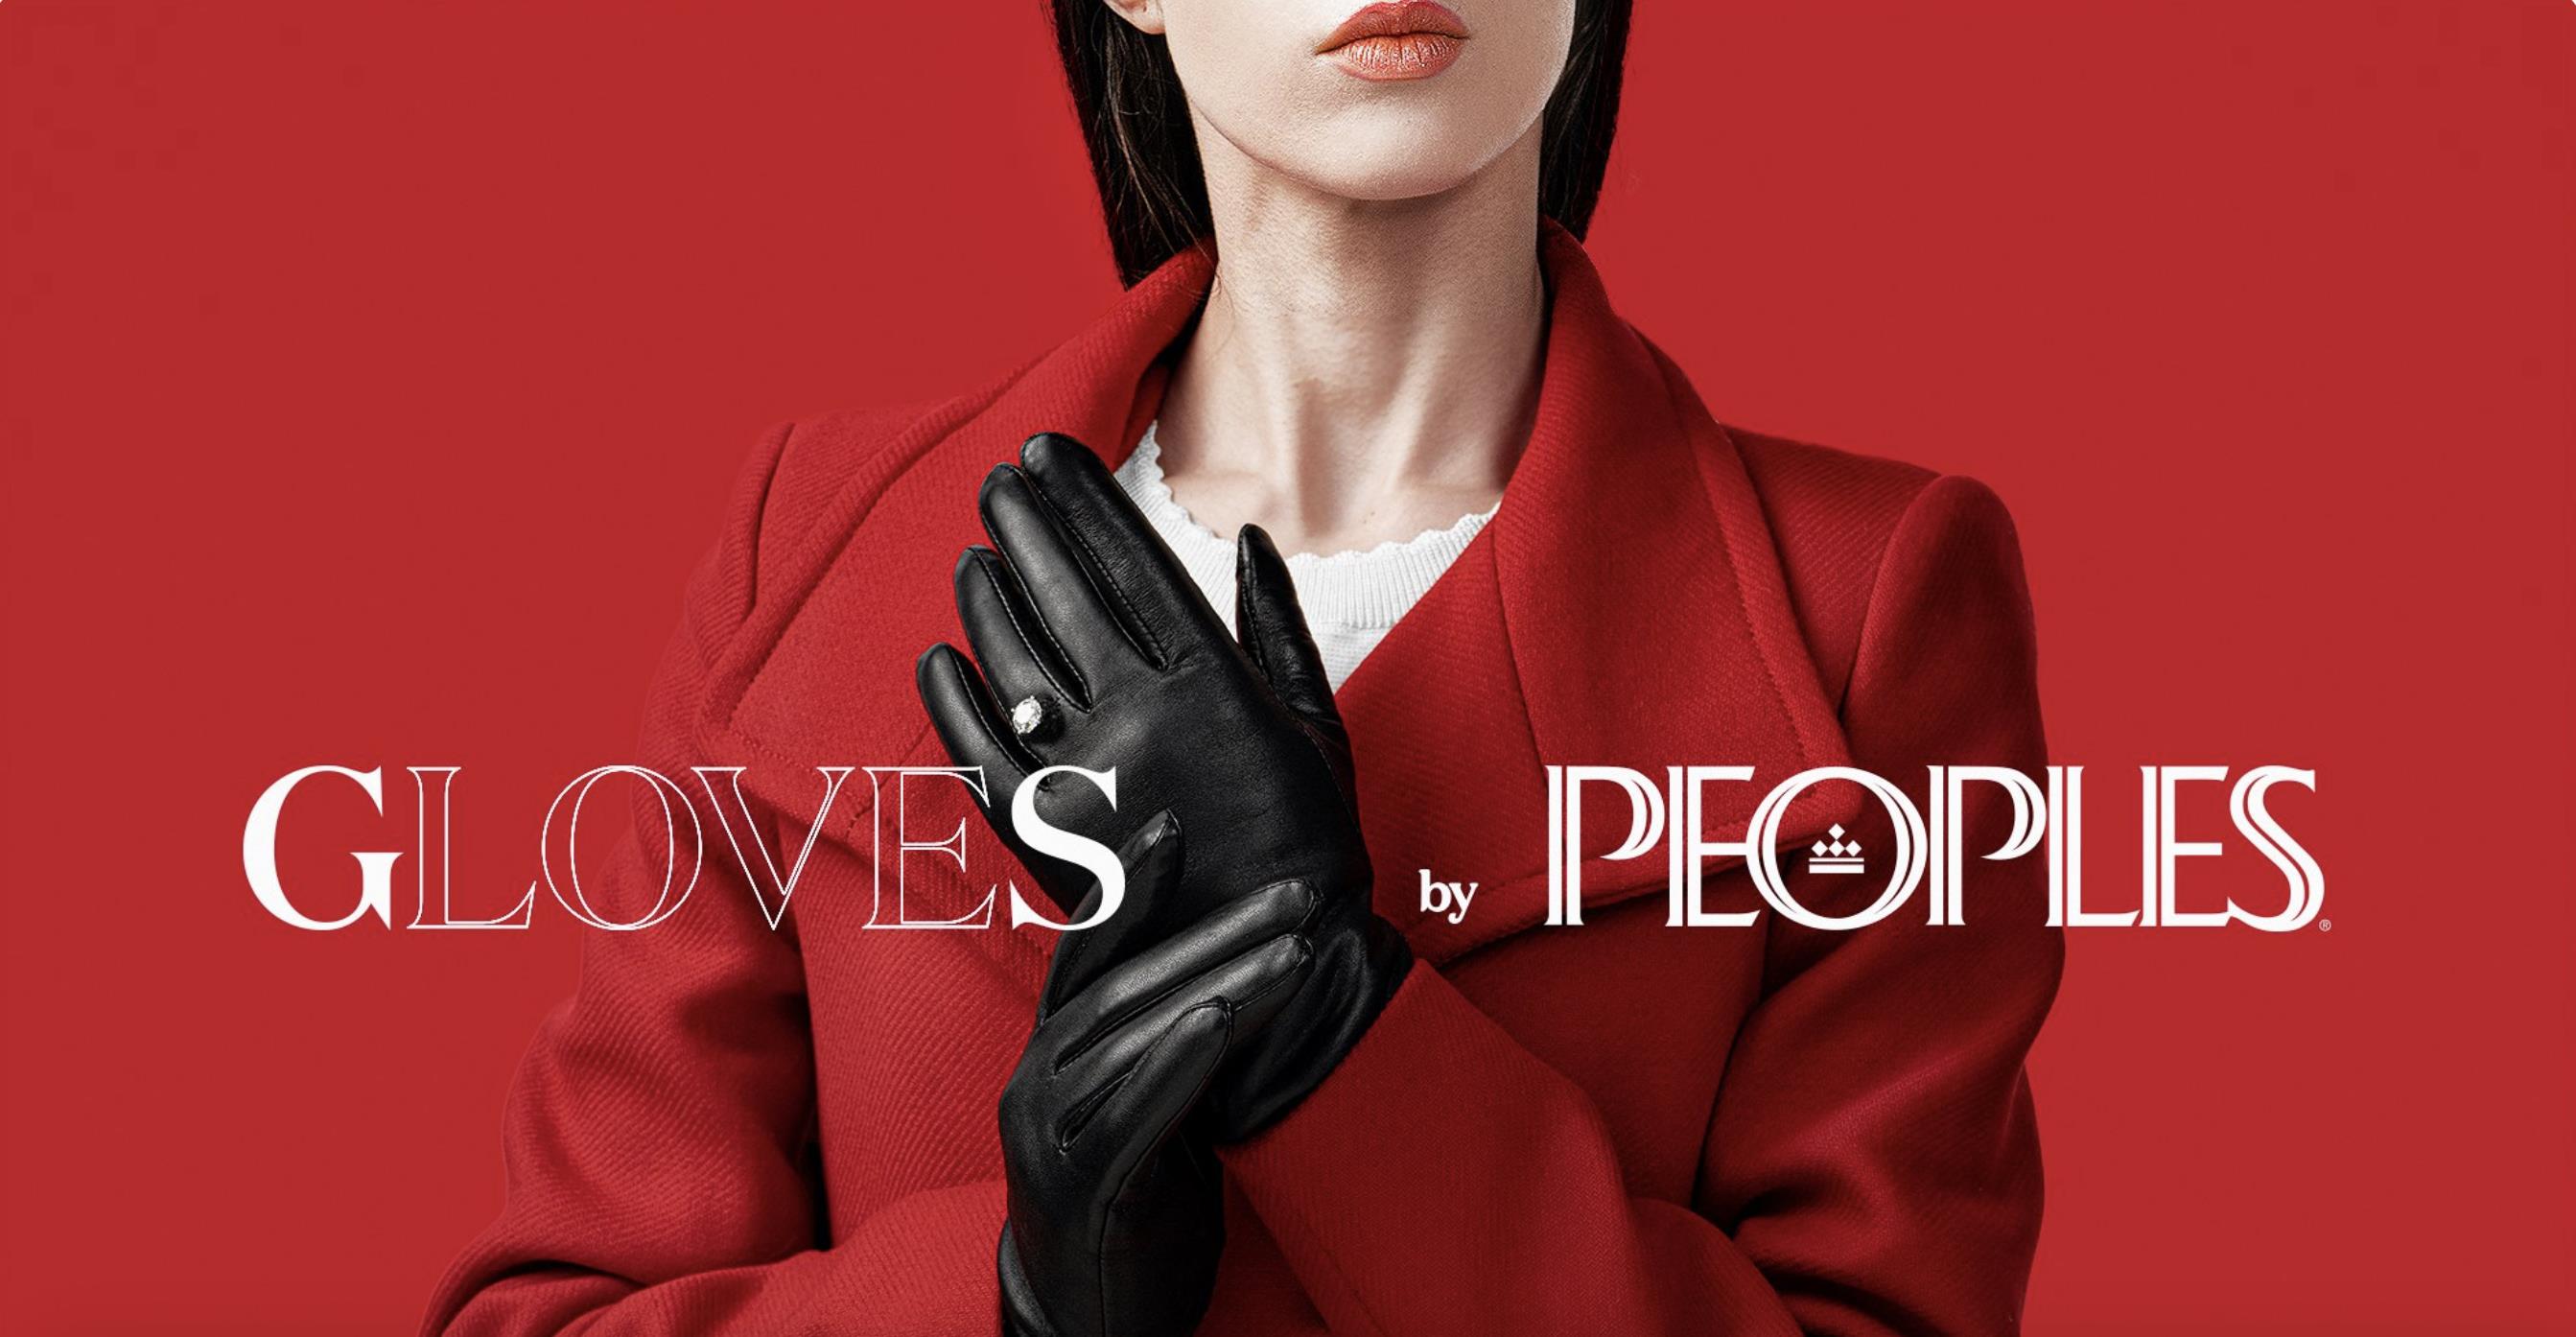 Gloves by Peoples